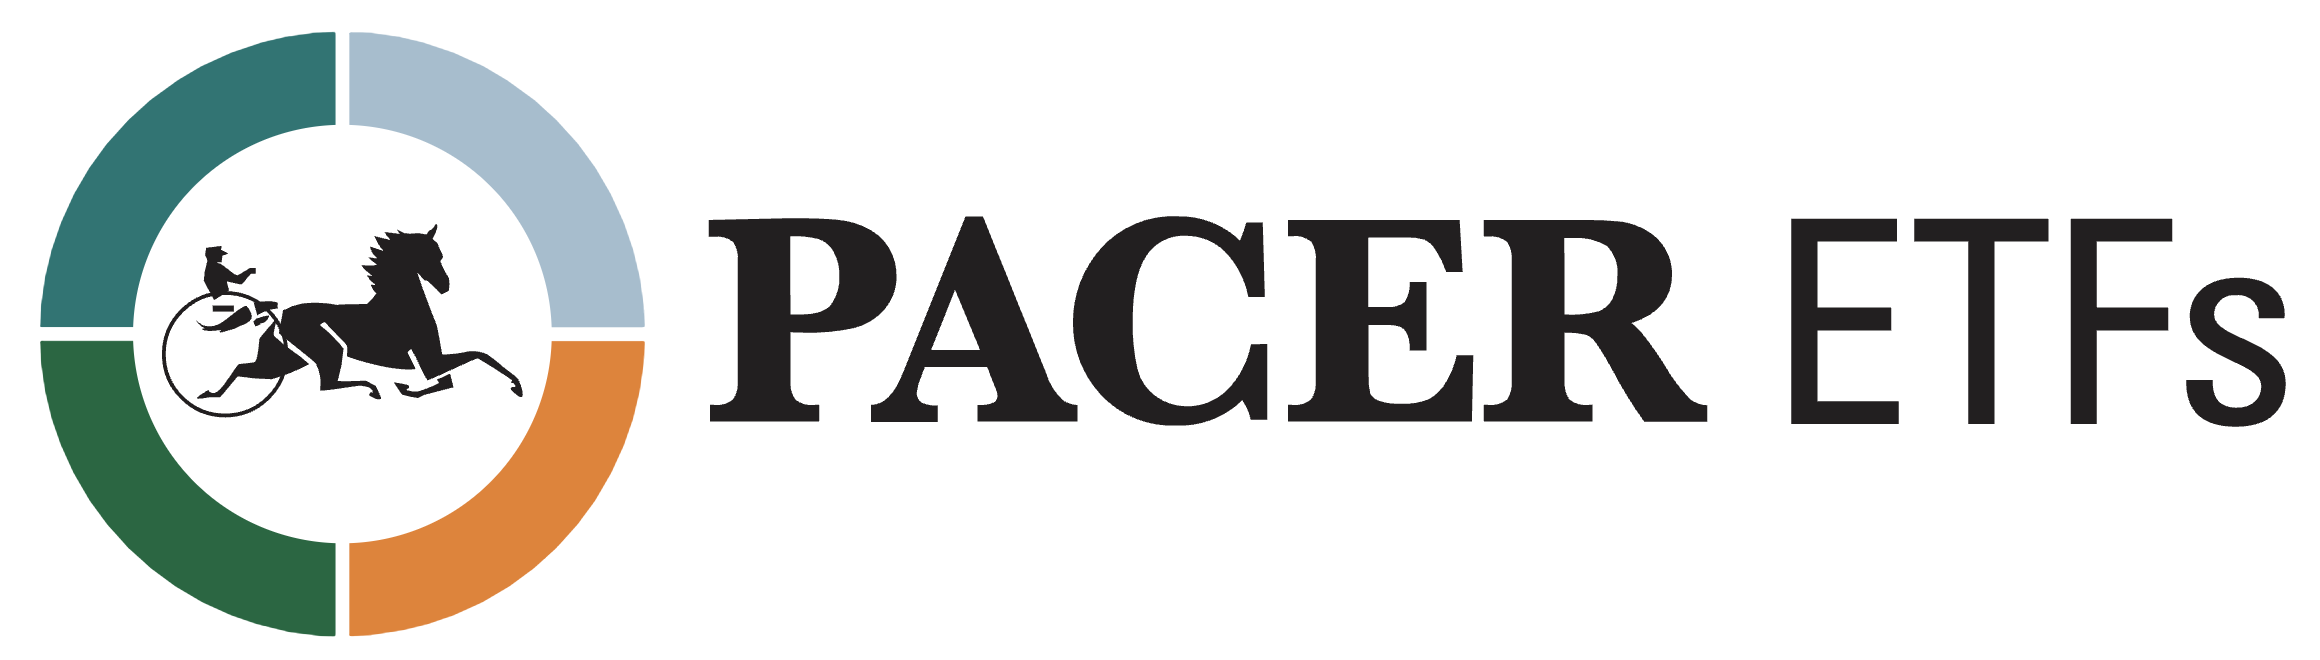 PACER ETFs | Providing Investors with Strategy Driven Products 